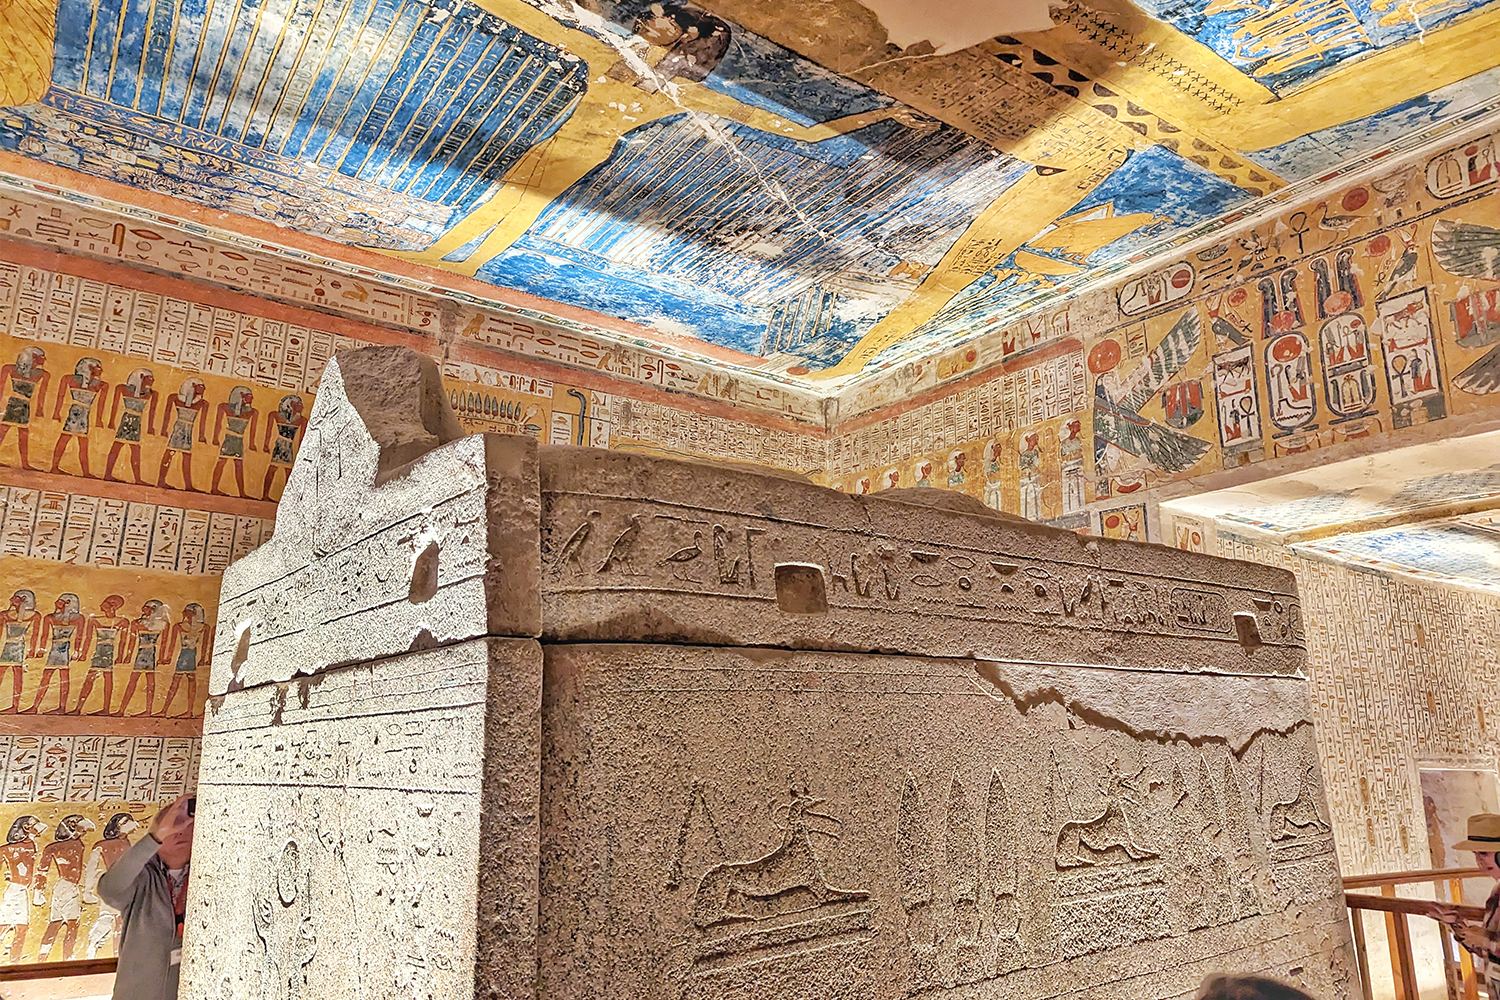 An Egyptian tomb with decorative walls and hieroglyphs